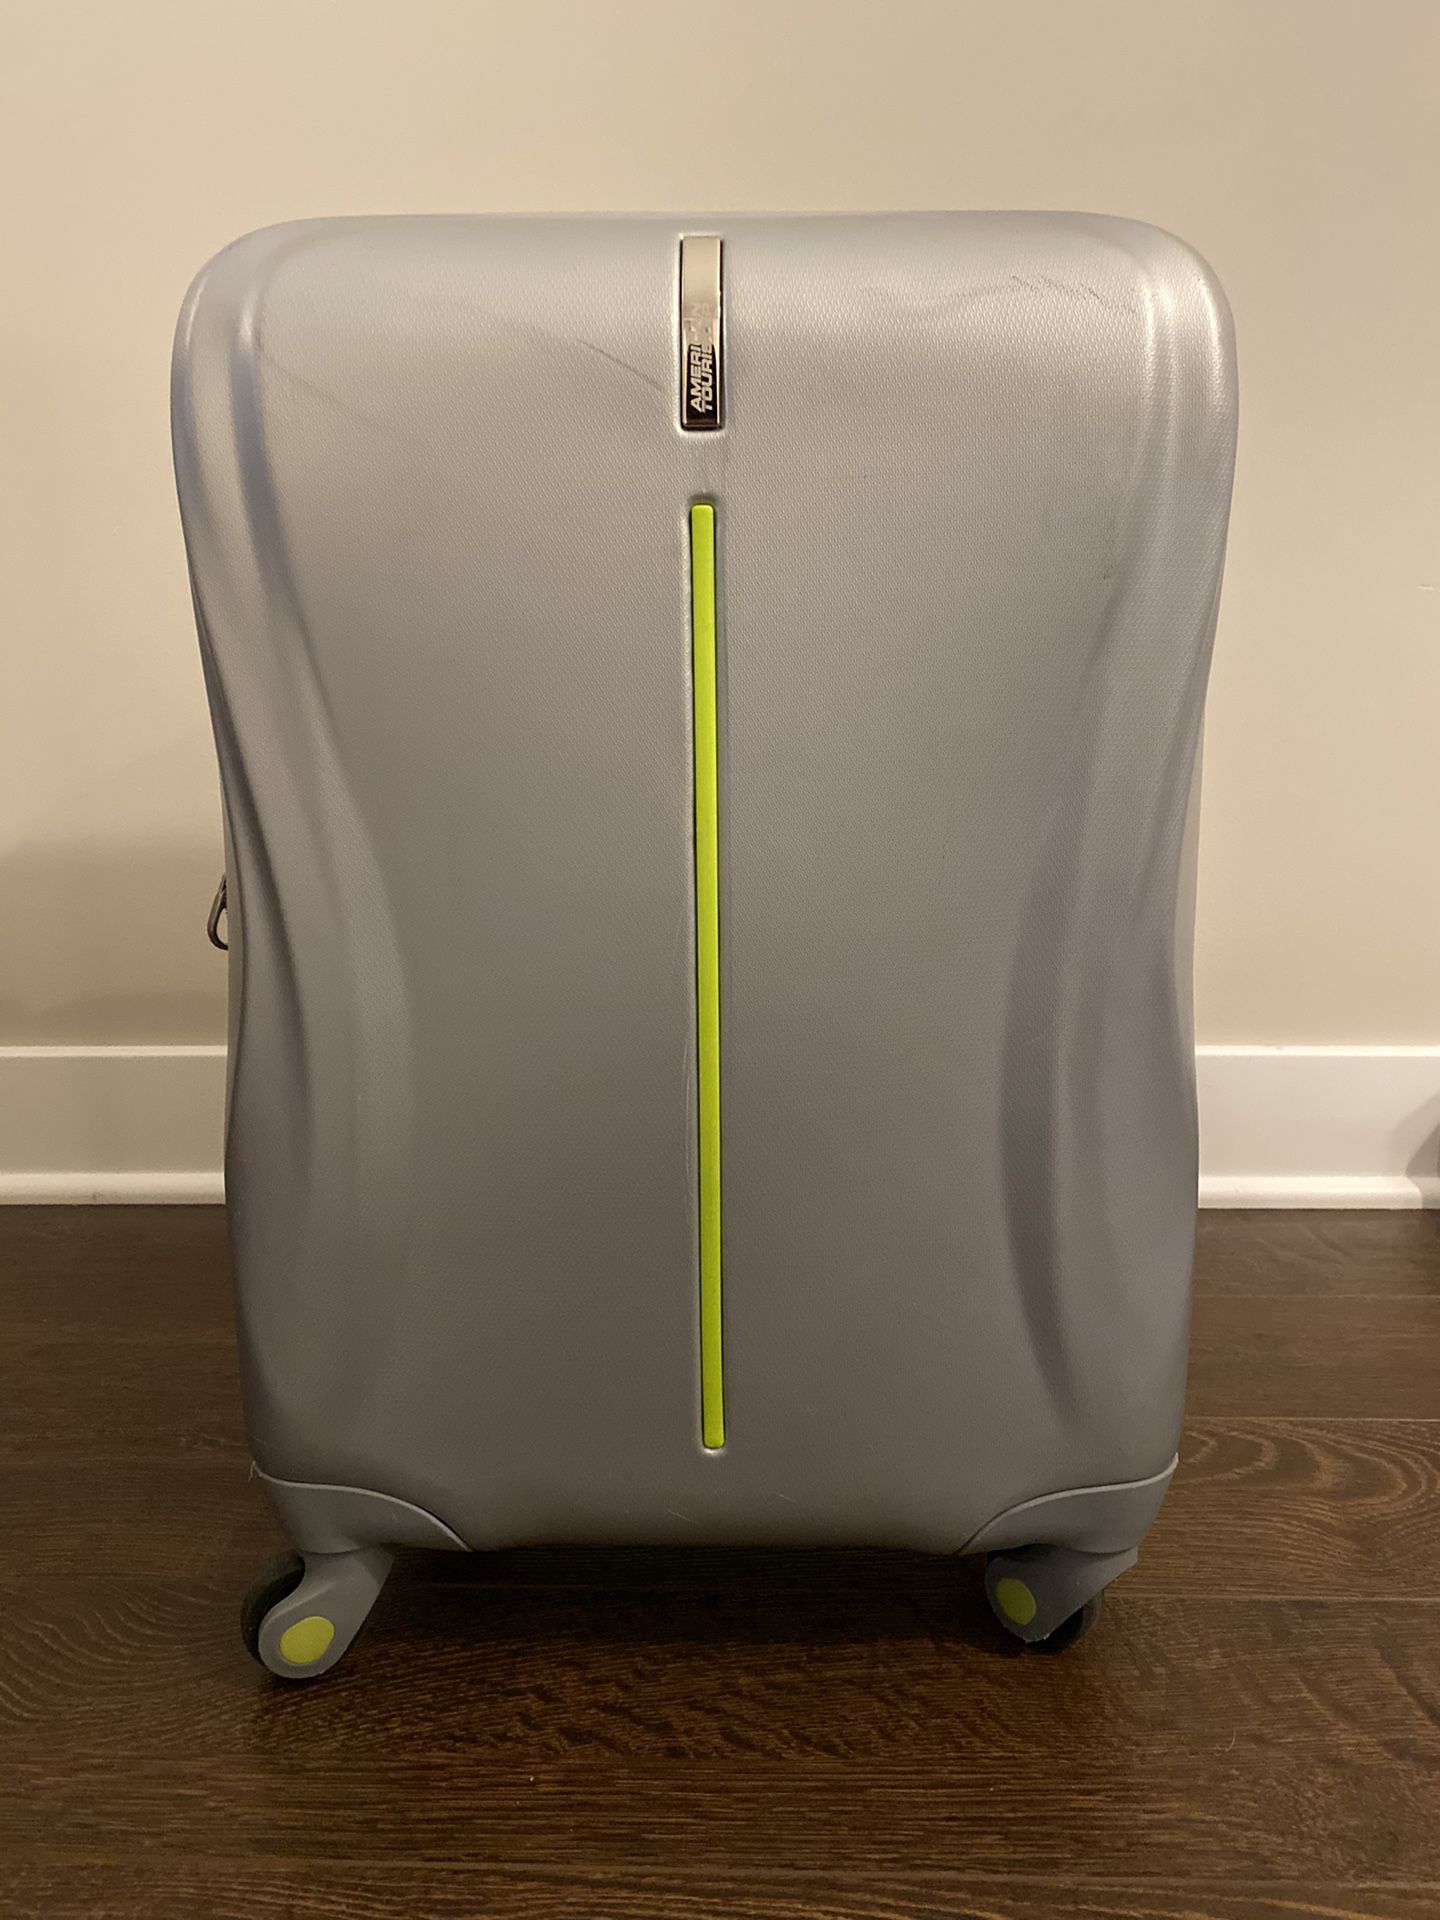 Excellent Condition American Tourister Hard Side Rolling Carry On Bag